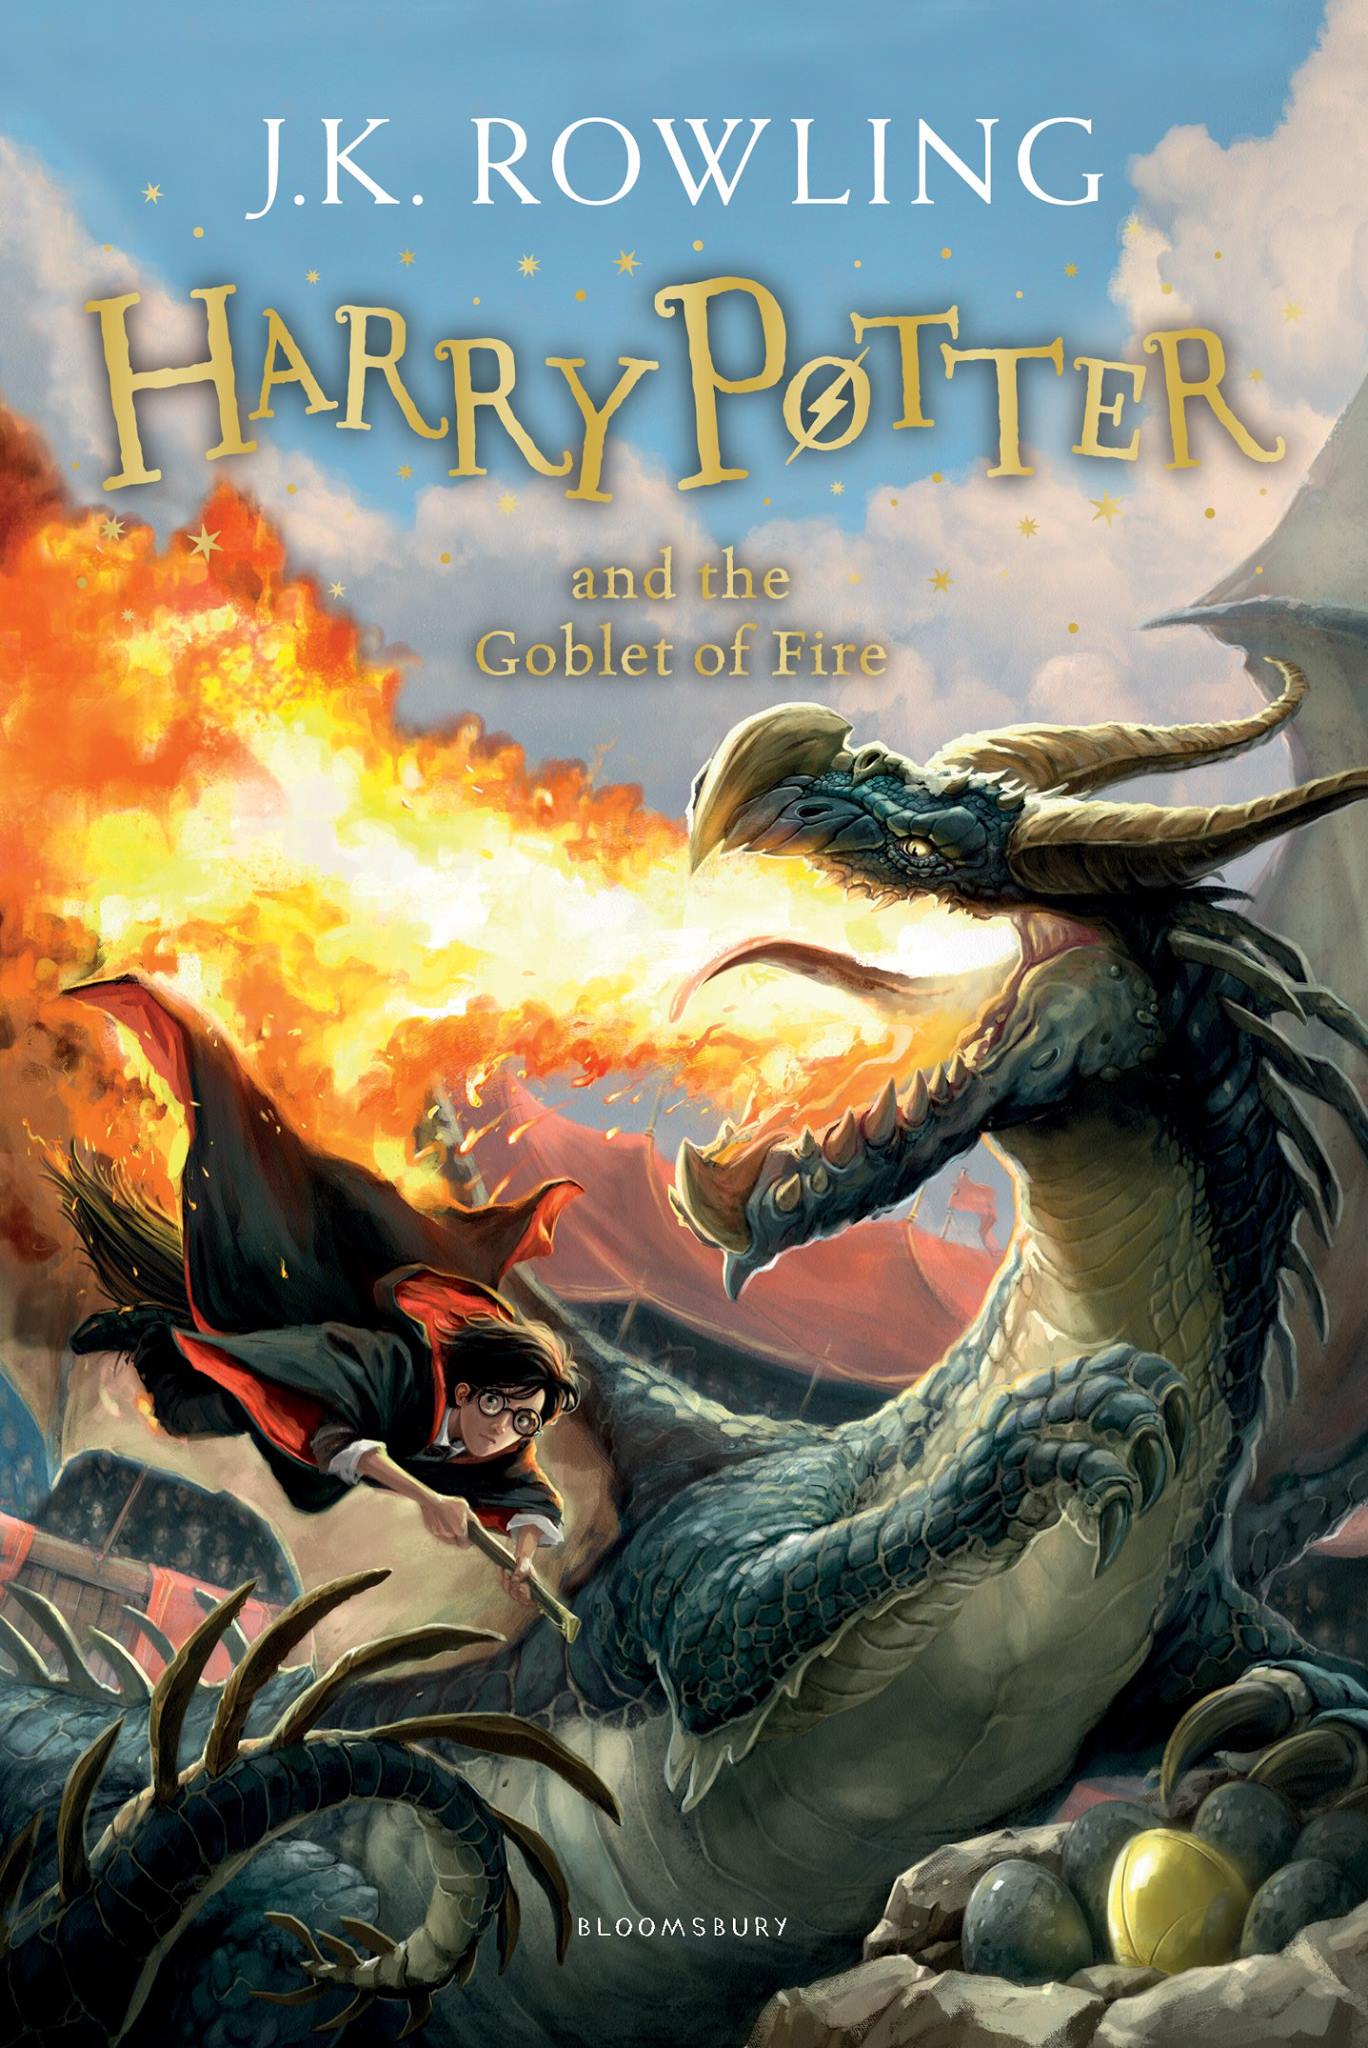 harry potter and the goblet of fire release date